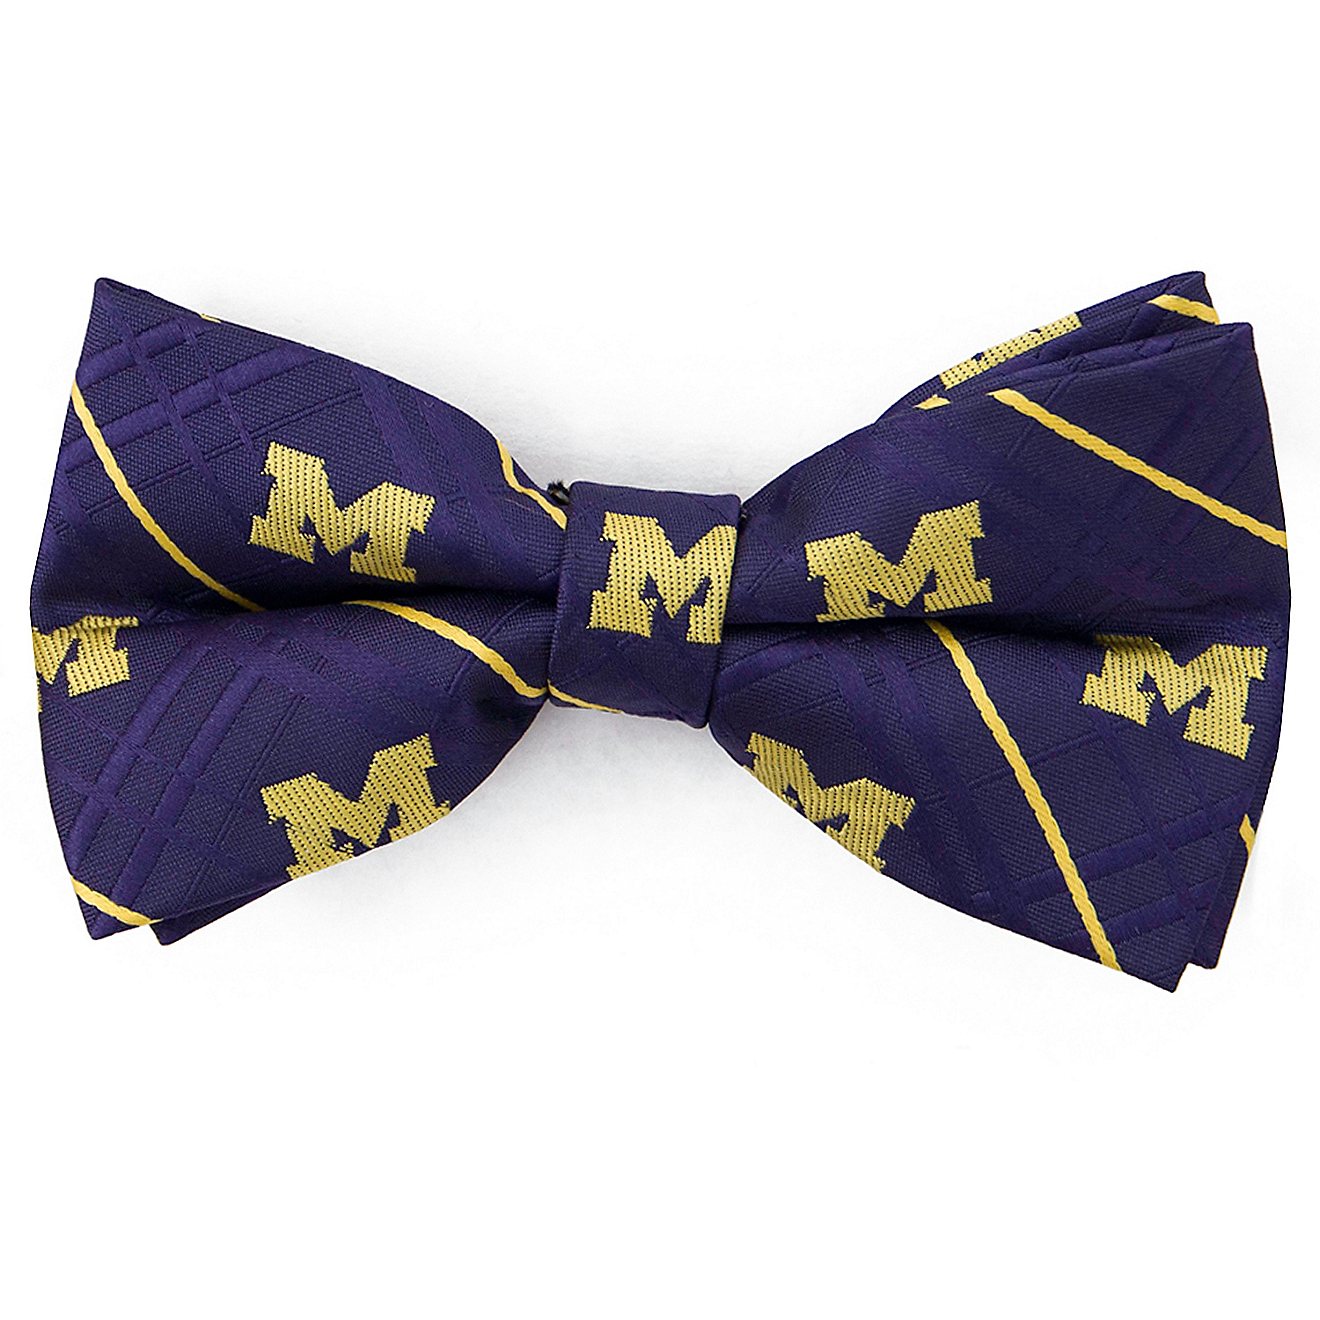 Eagles Wings Men's University of Michigan Oxford Bow Tie                                                                         - view number 1